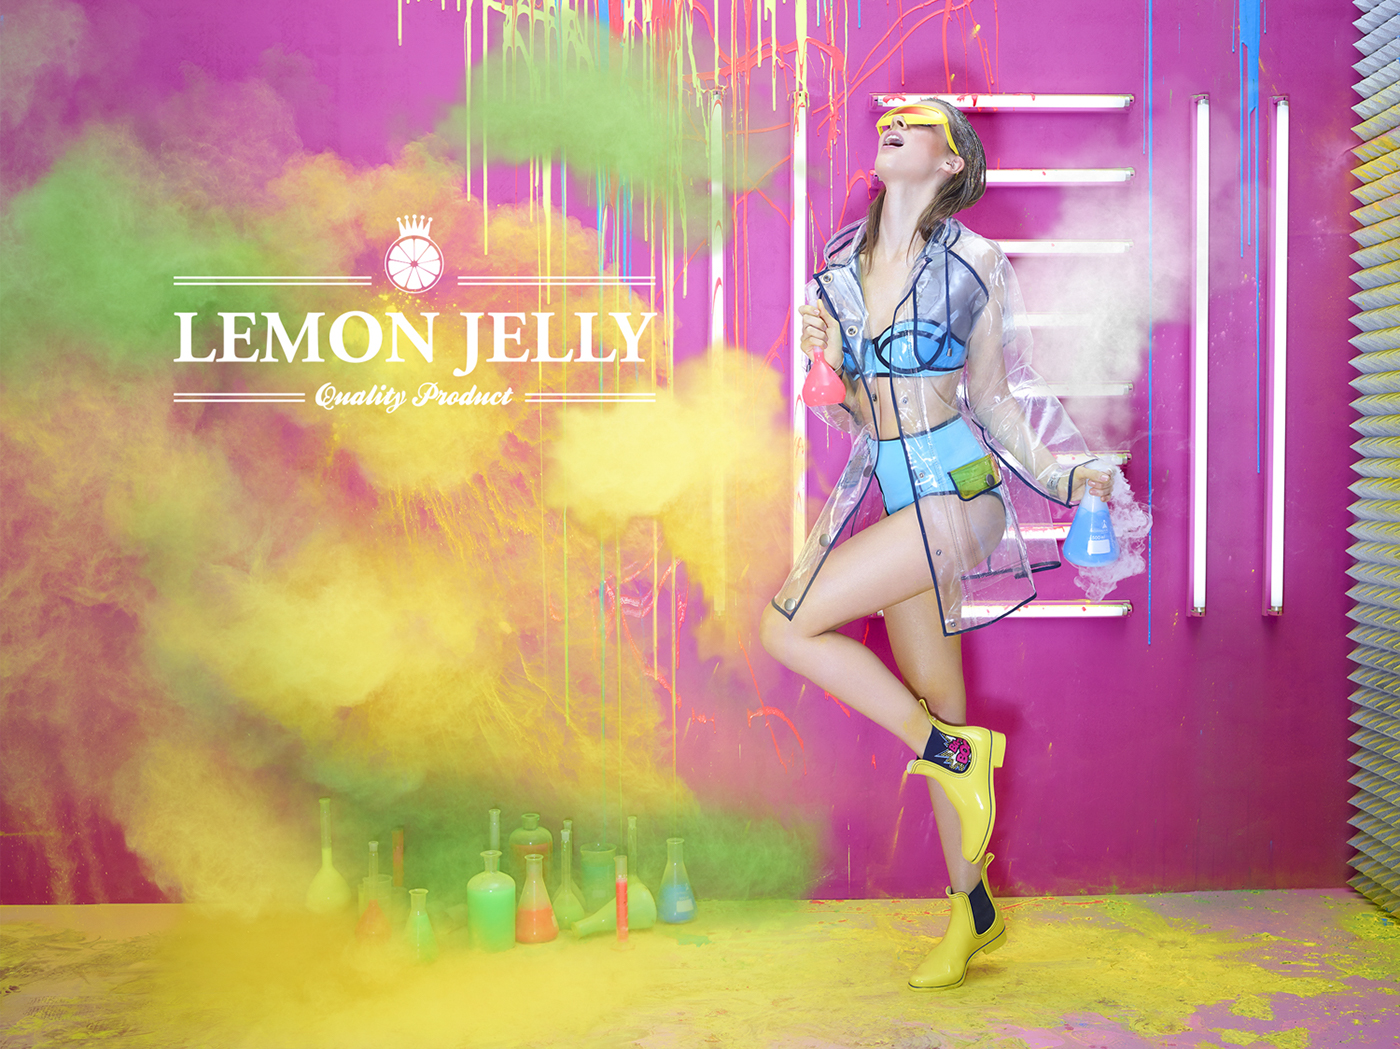 lalaland studios Lemon jelly Advertising  campaing Mad Scientist frederico martins Portugal shoes lemon jelly